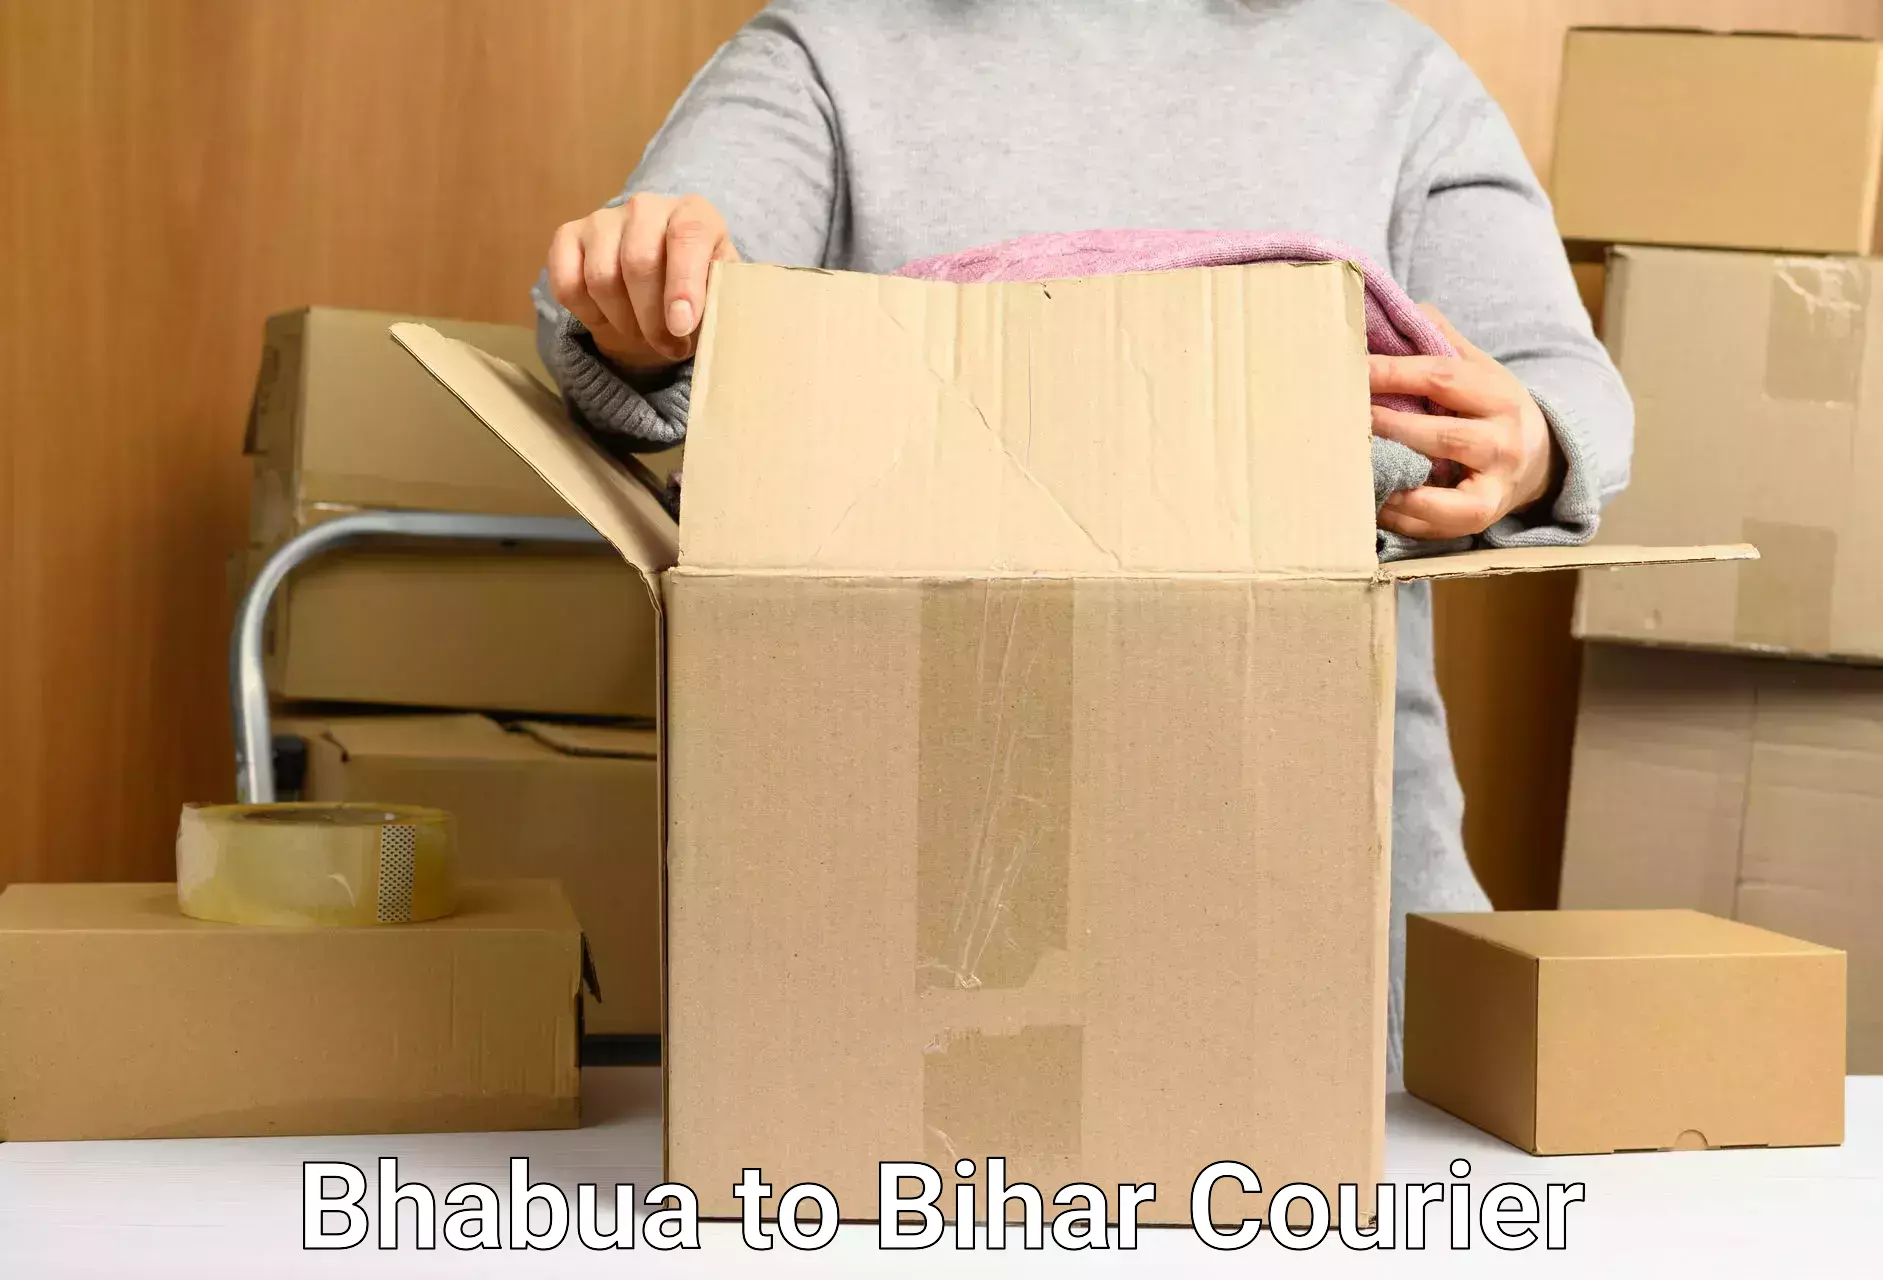 Affordable parcel service in Bhabua to Nawada